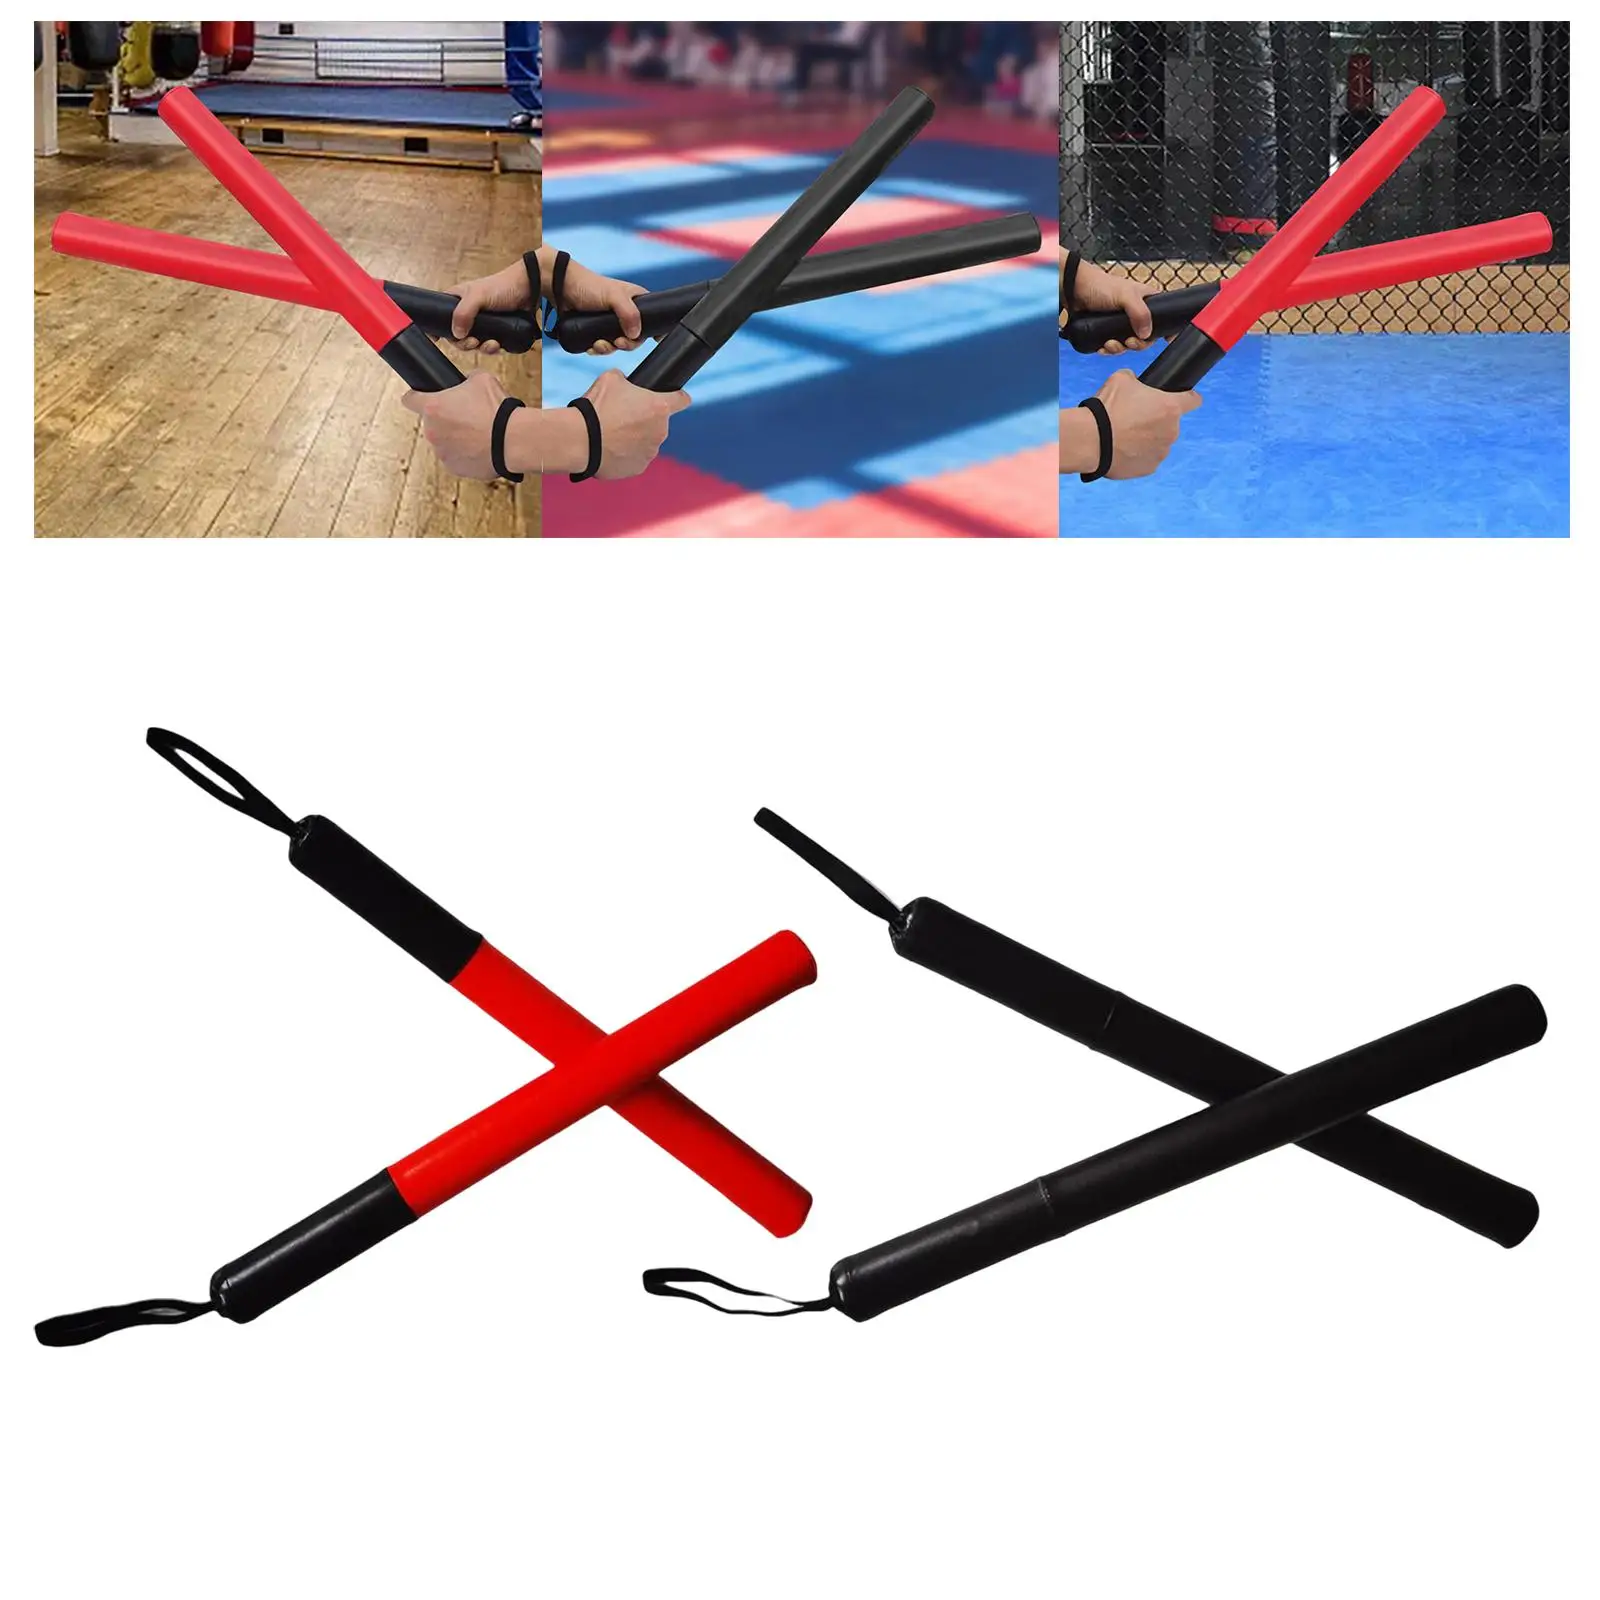 2Pcs Boxing Training Rods Punching Pads Boxing Training Equipment Tool for